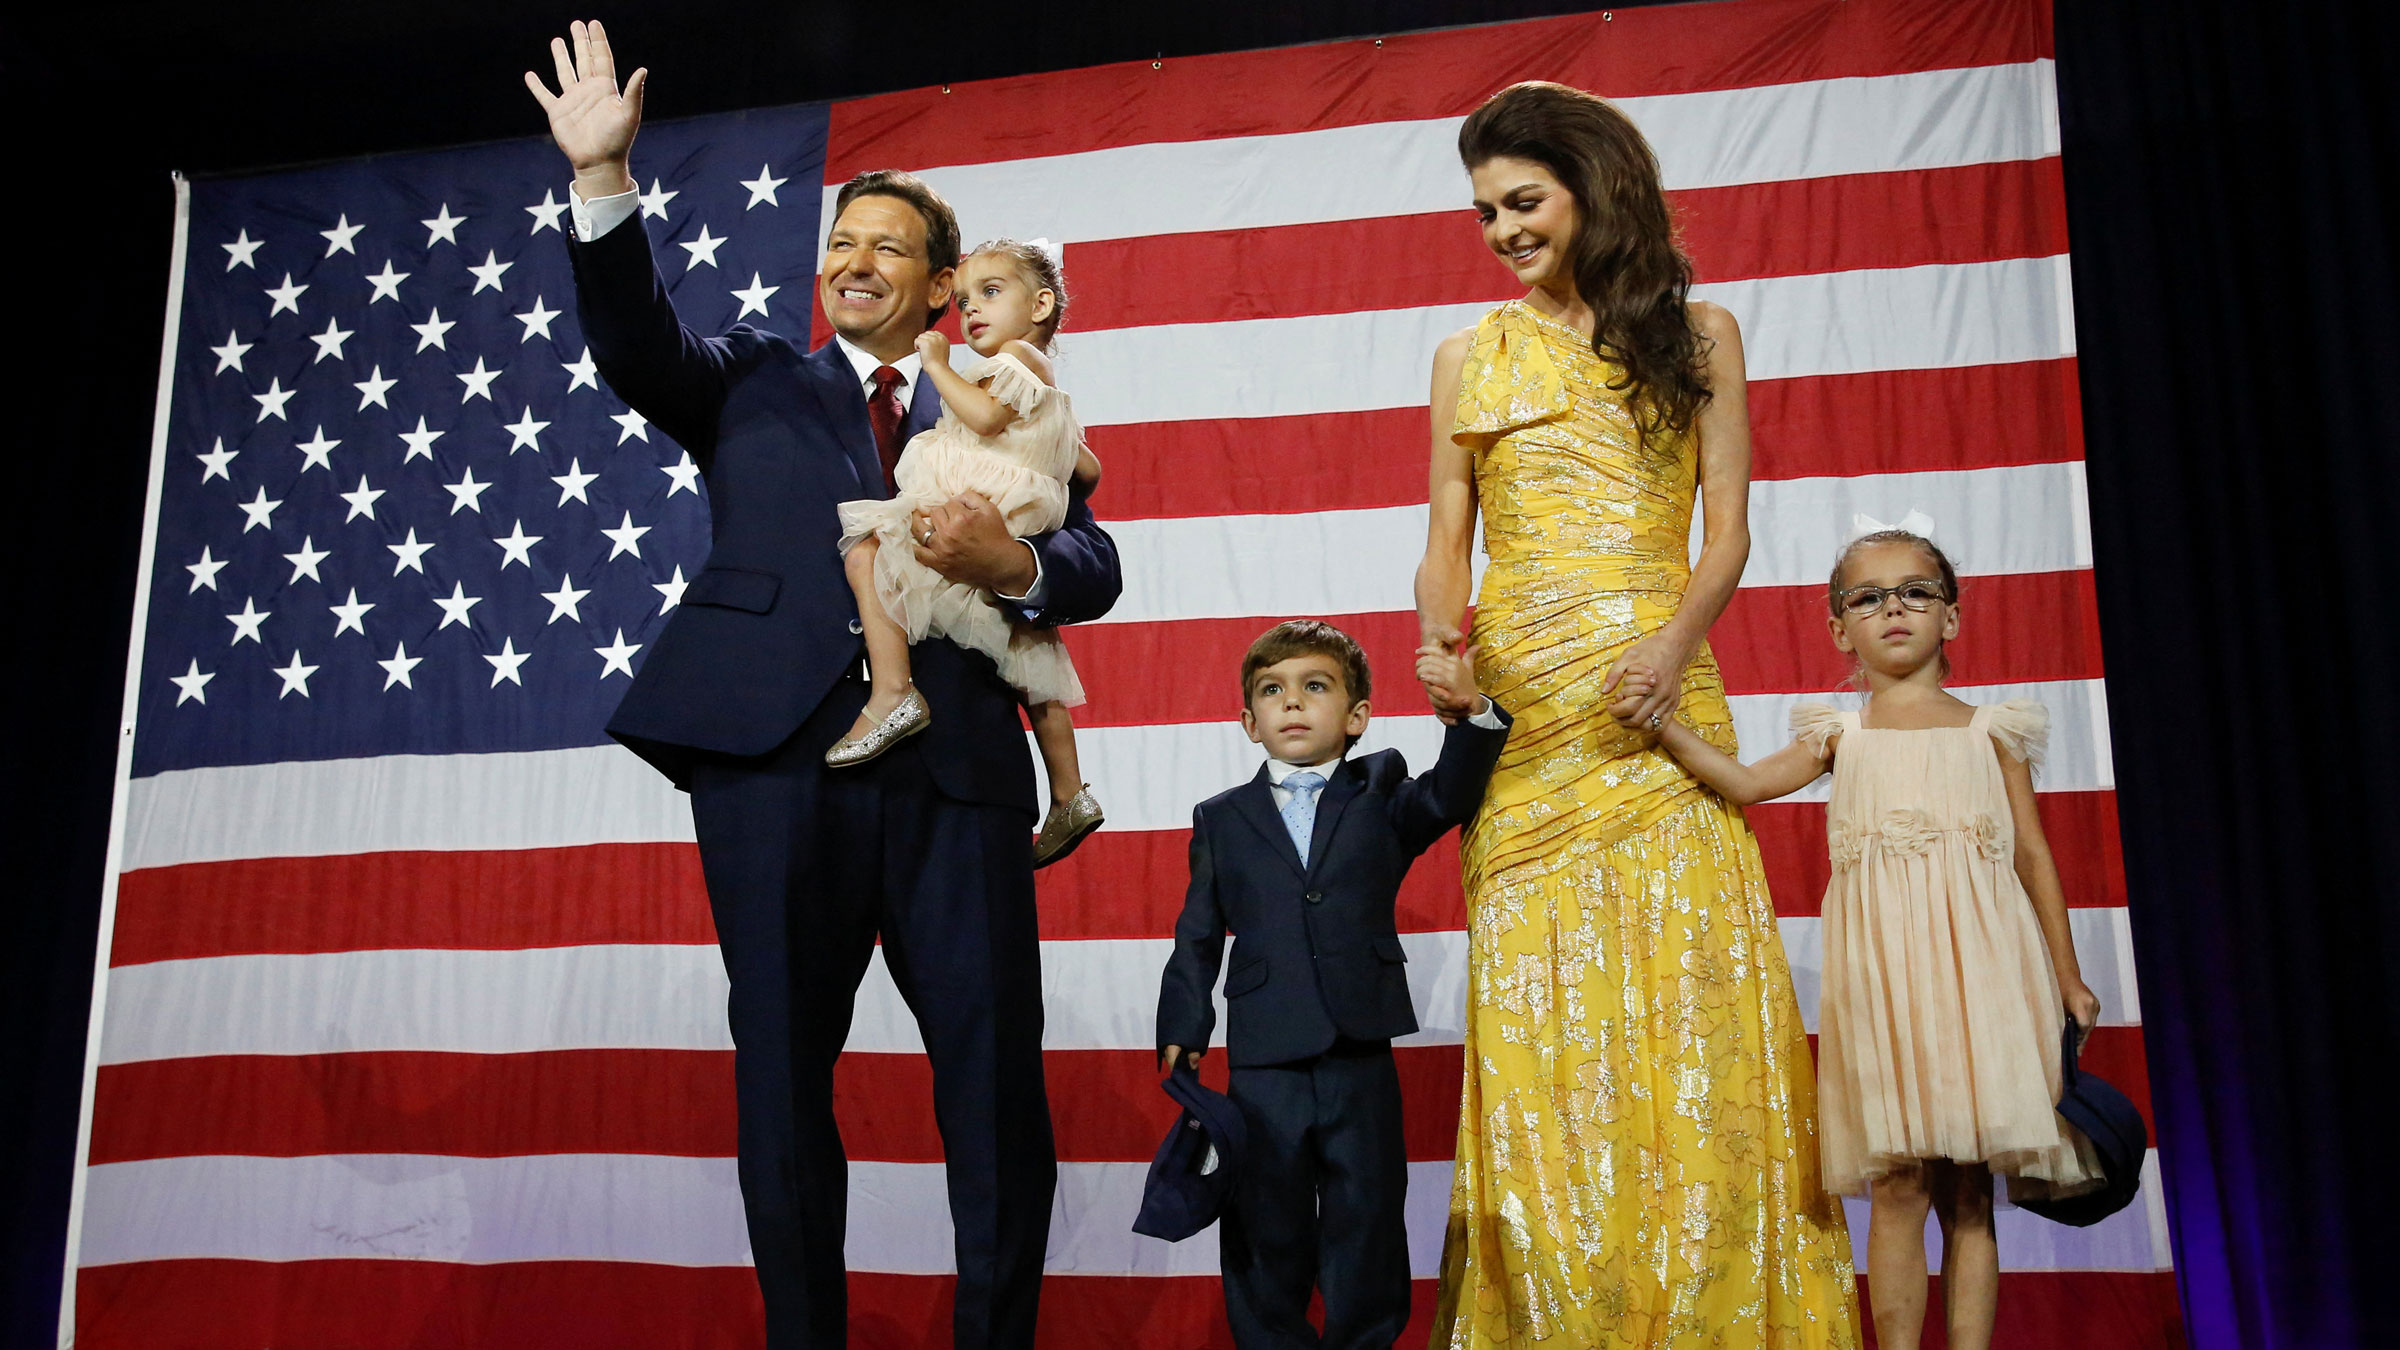 Florida Gov. Ron DeSantis is joined on stage by his wife, Casey, and their children during his election night party in Tampa.